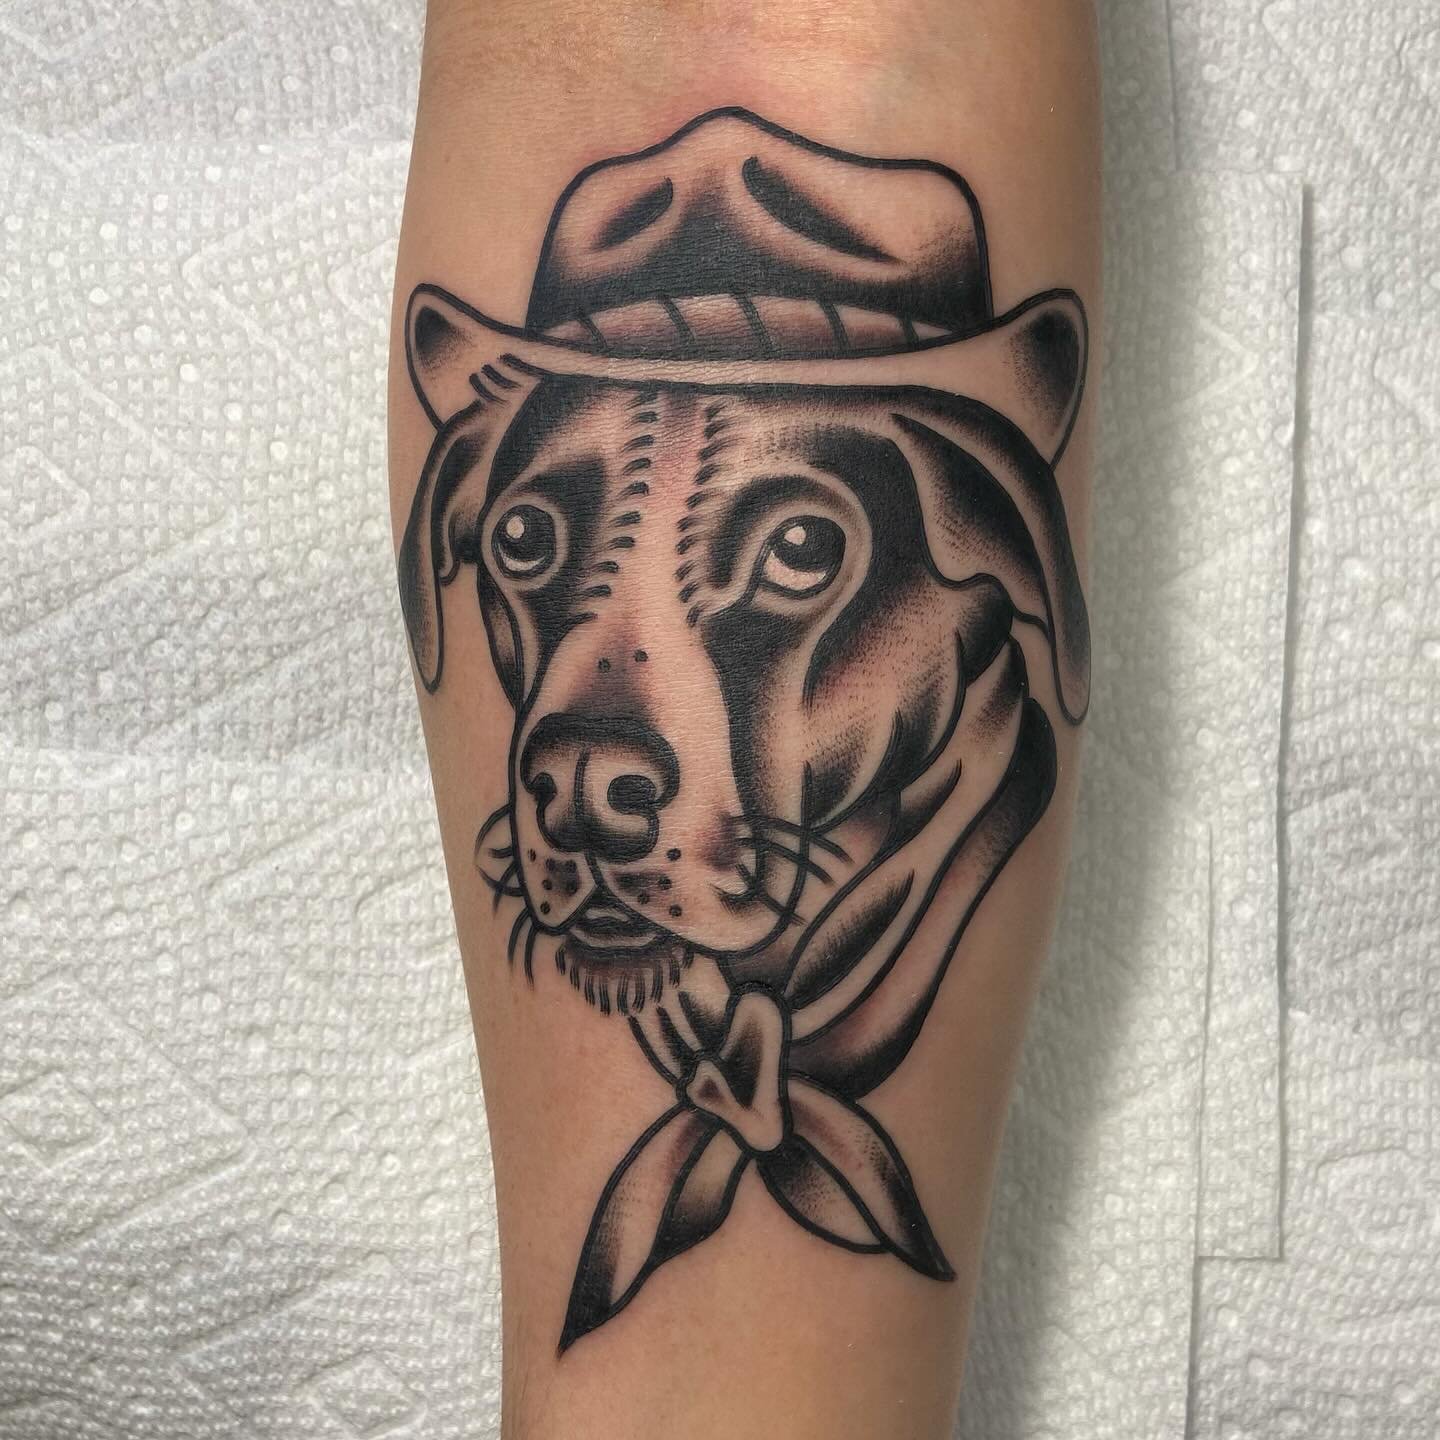 Always down to turn your pup into a cowboy and immortalize them on your flesh @36thstreettattoo